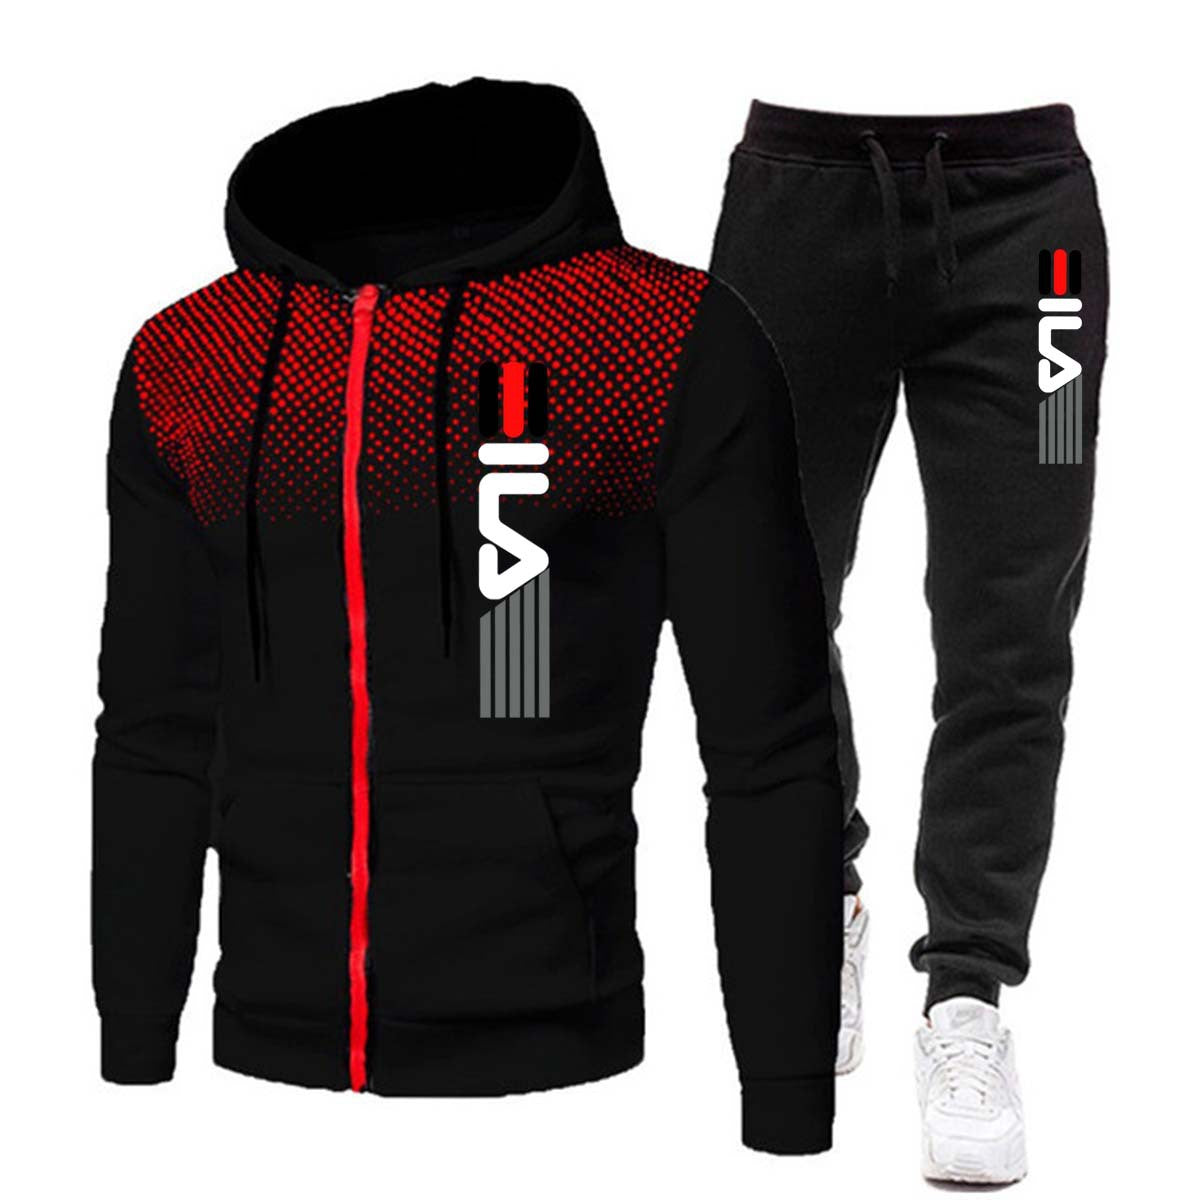 Autumn And Winter New European And American Fleece Sweater Sweatpants Men's Casual Sports Hooded Suit